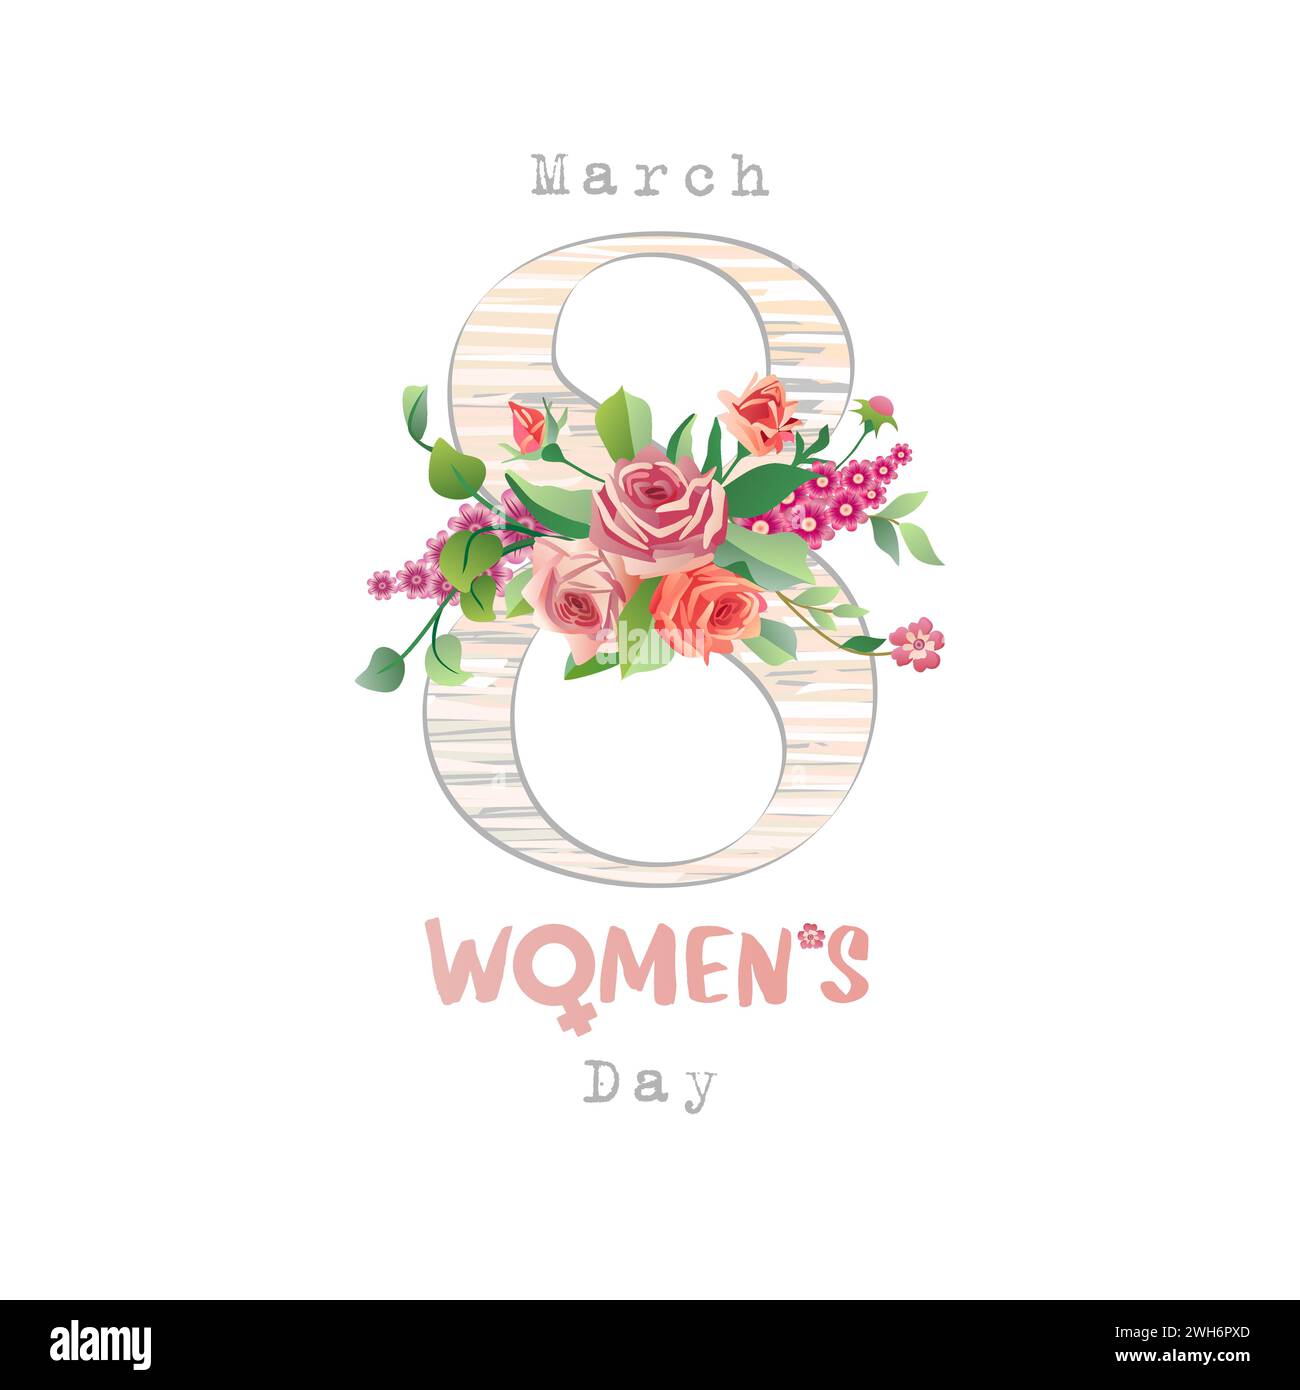 March 8 Women's Day creative greeting card with handdrawn style symbol and vintage flowers and leaves. Calendar page with pink and red roses. Postcard Stock Vector